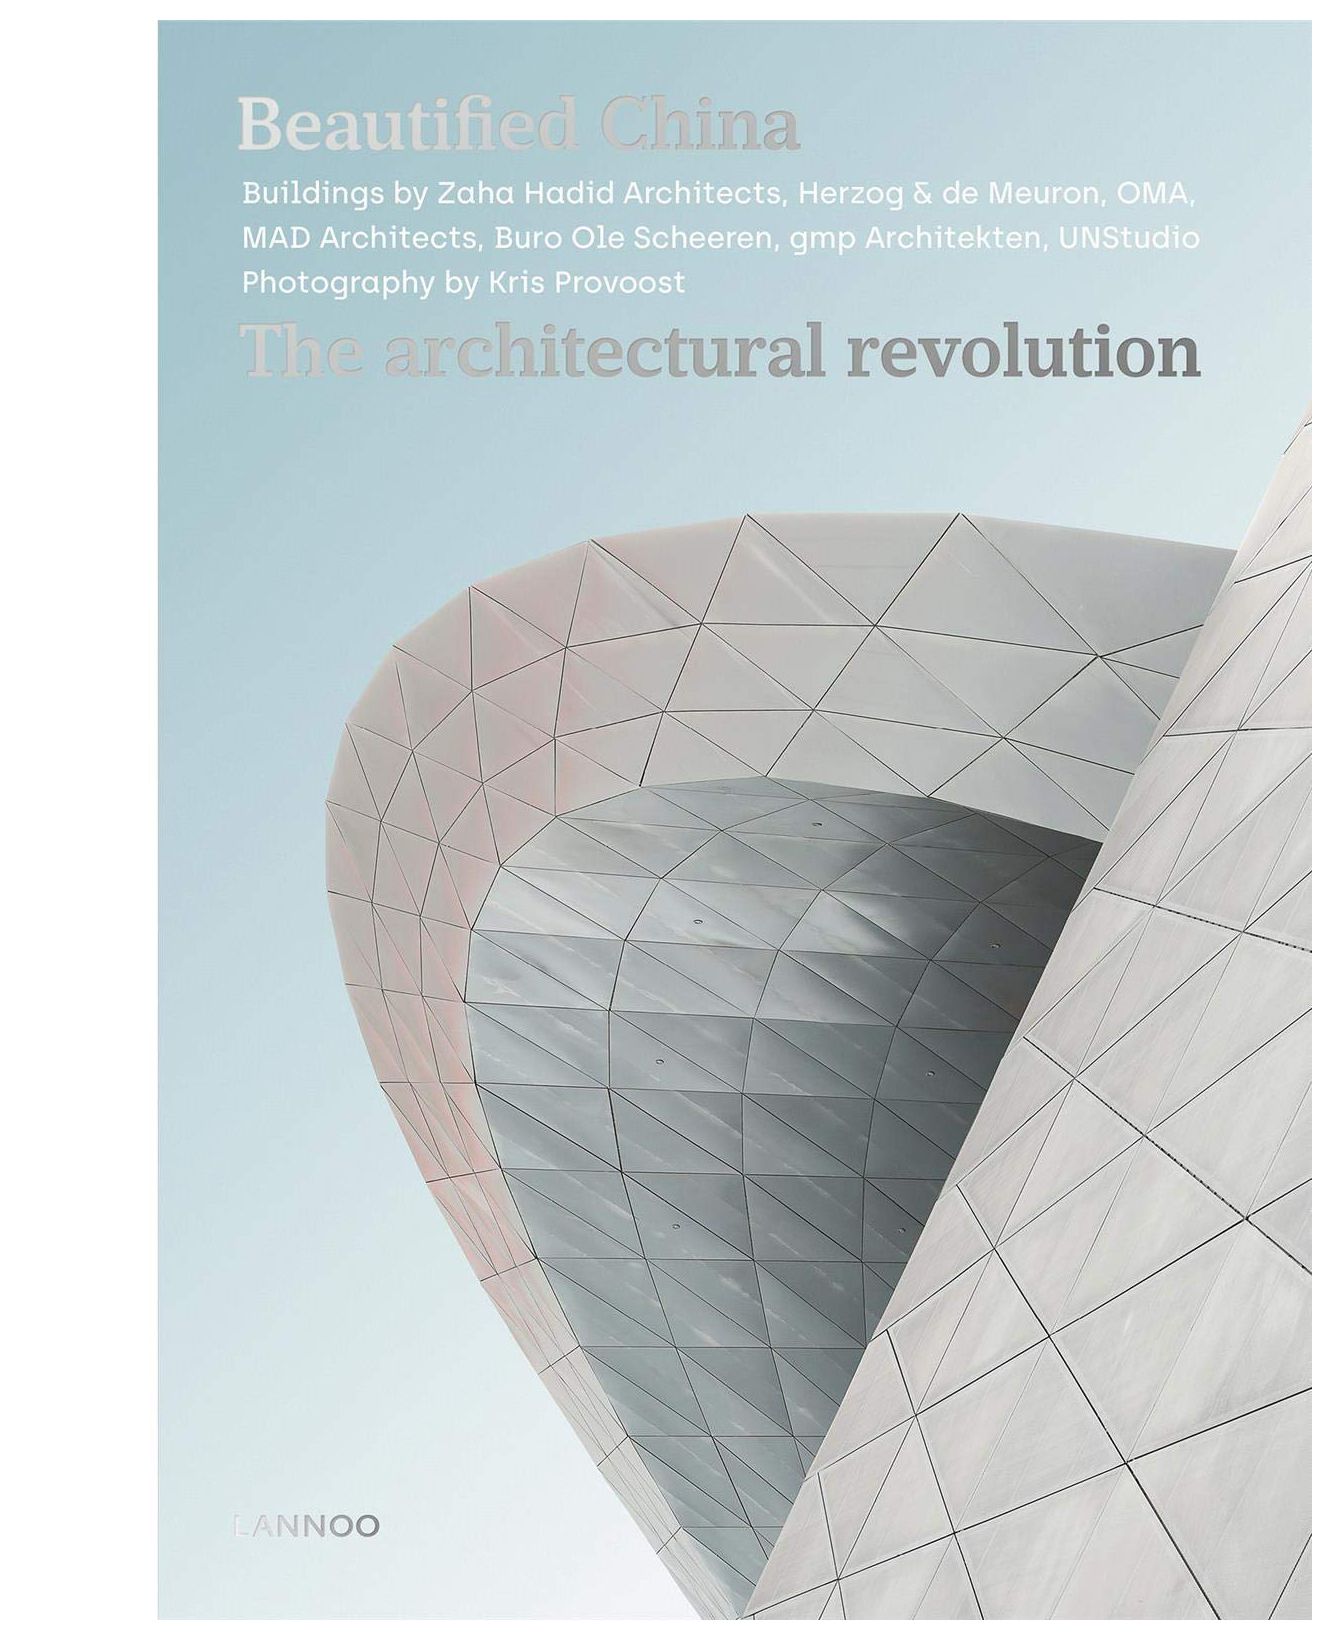 Beautified China: The Architectural Revolution s m l xl rem koolhaas and bruce mau